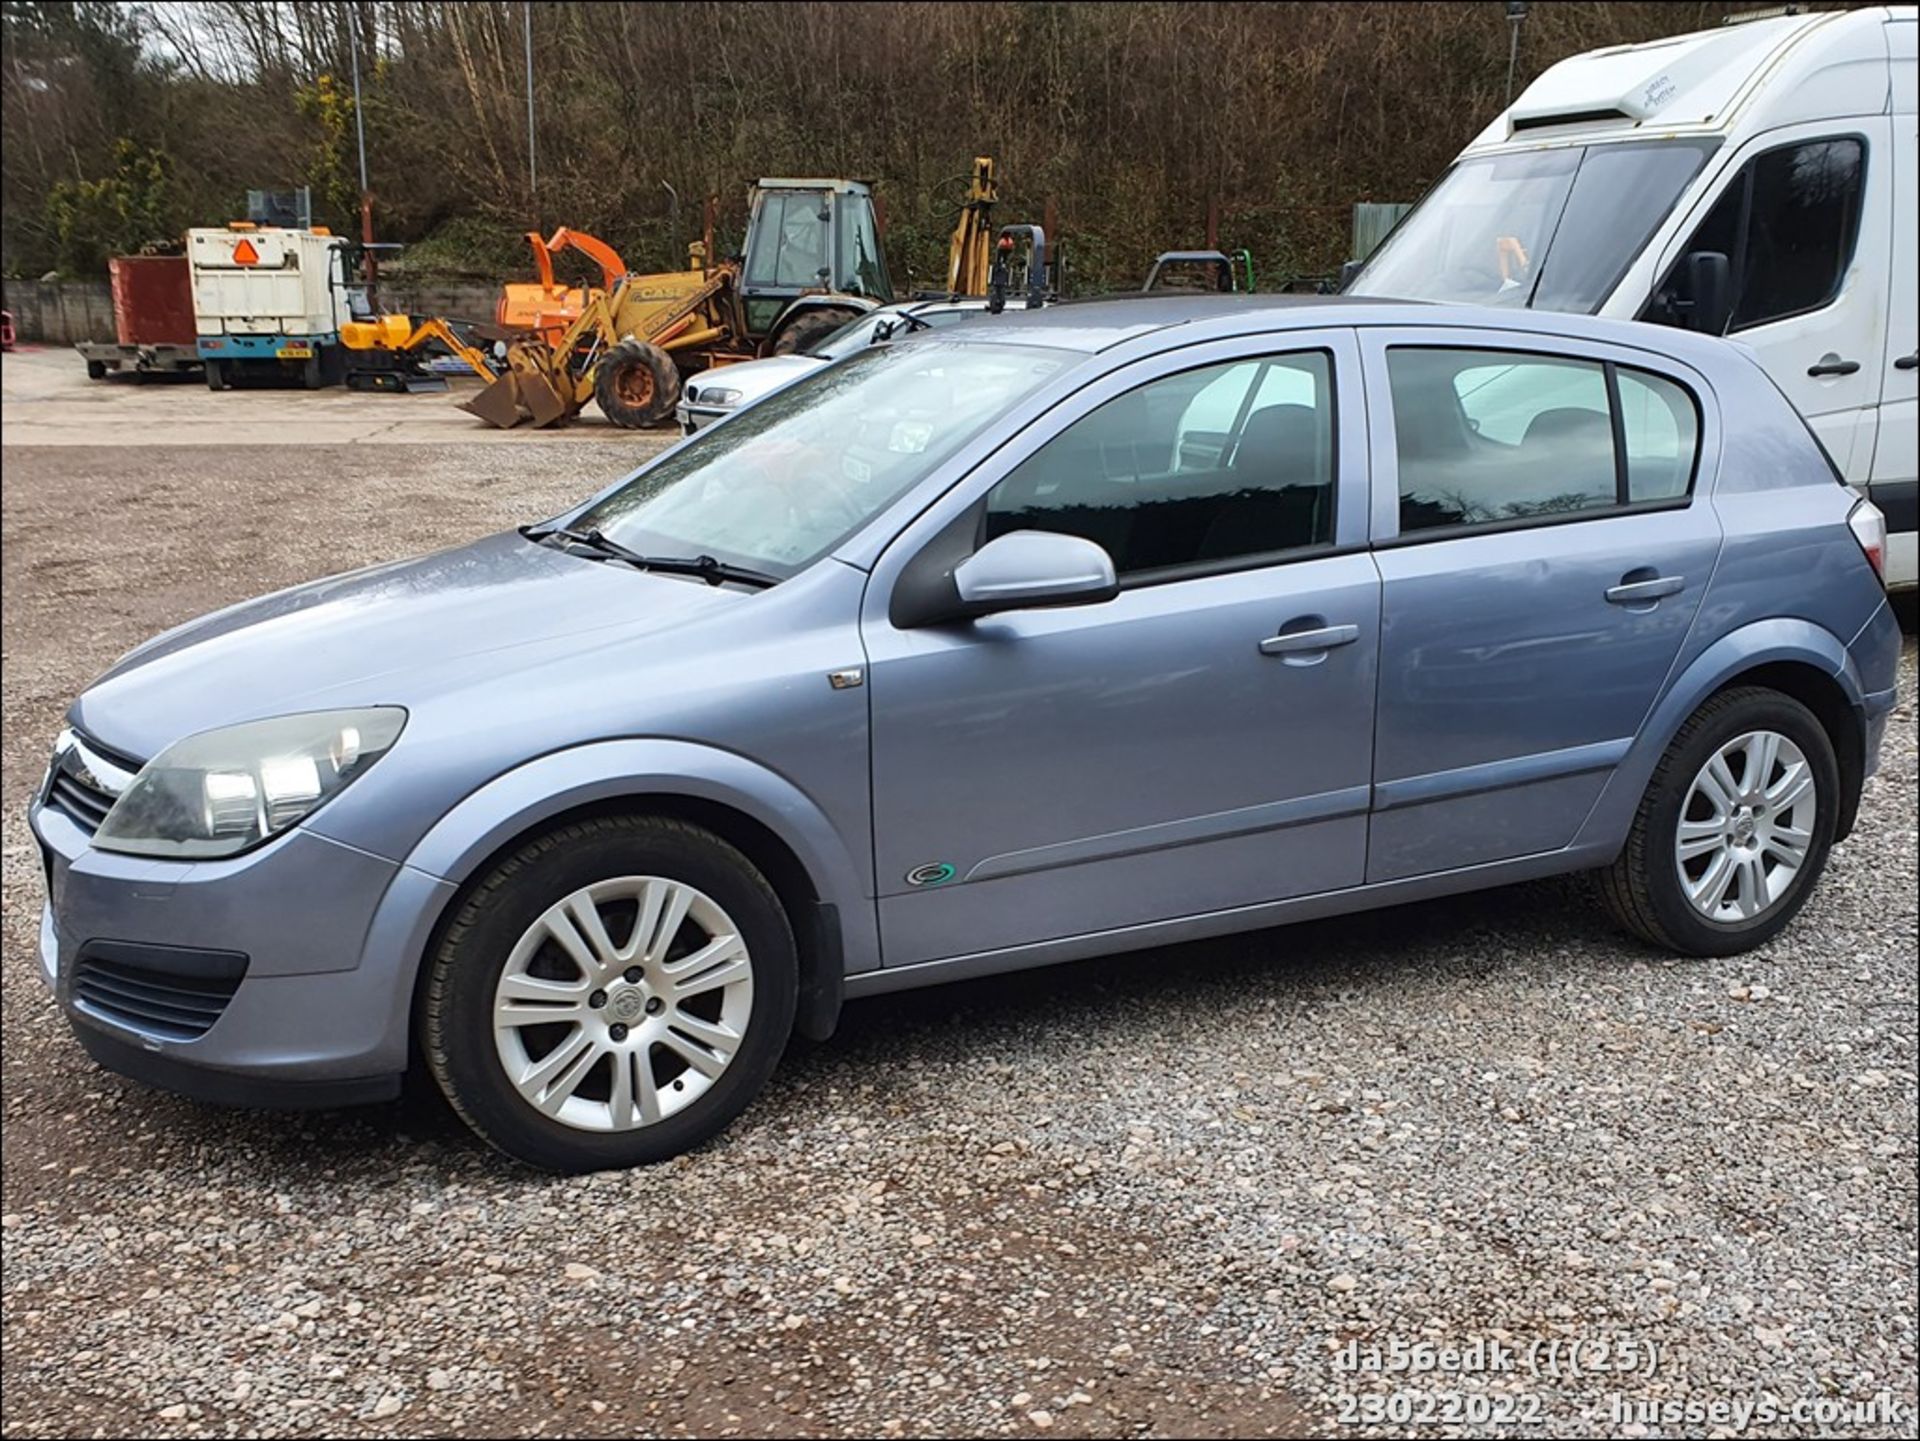 06/56 VAUXHALL ASTRA ACTIVE - 1598cc 5dr Hatchback (Silver)